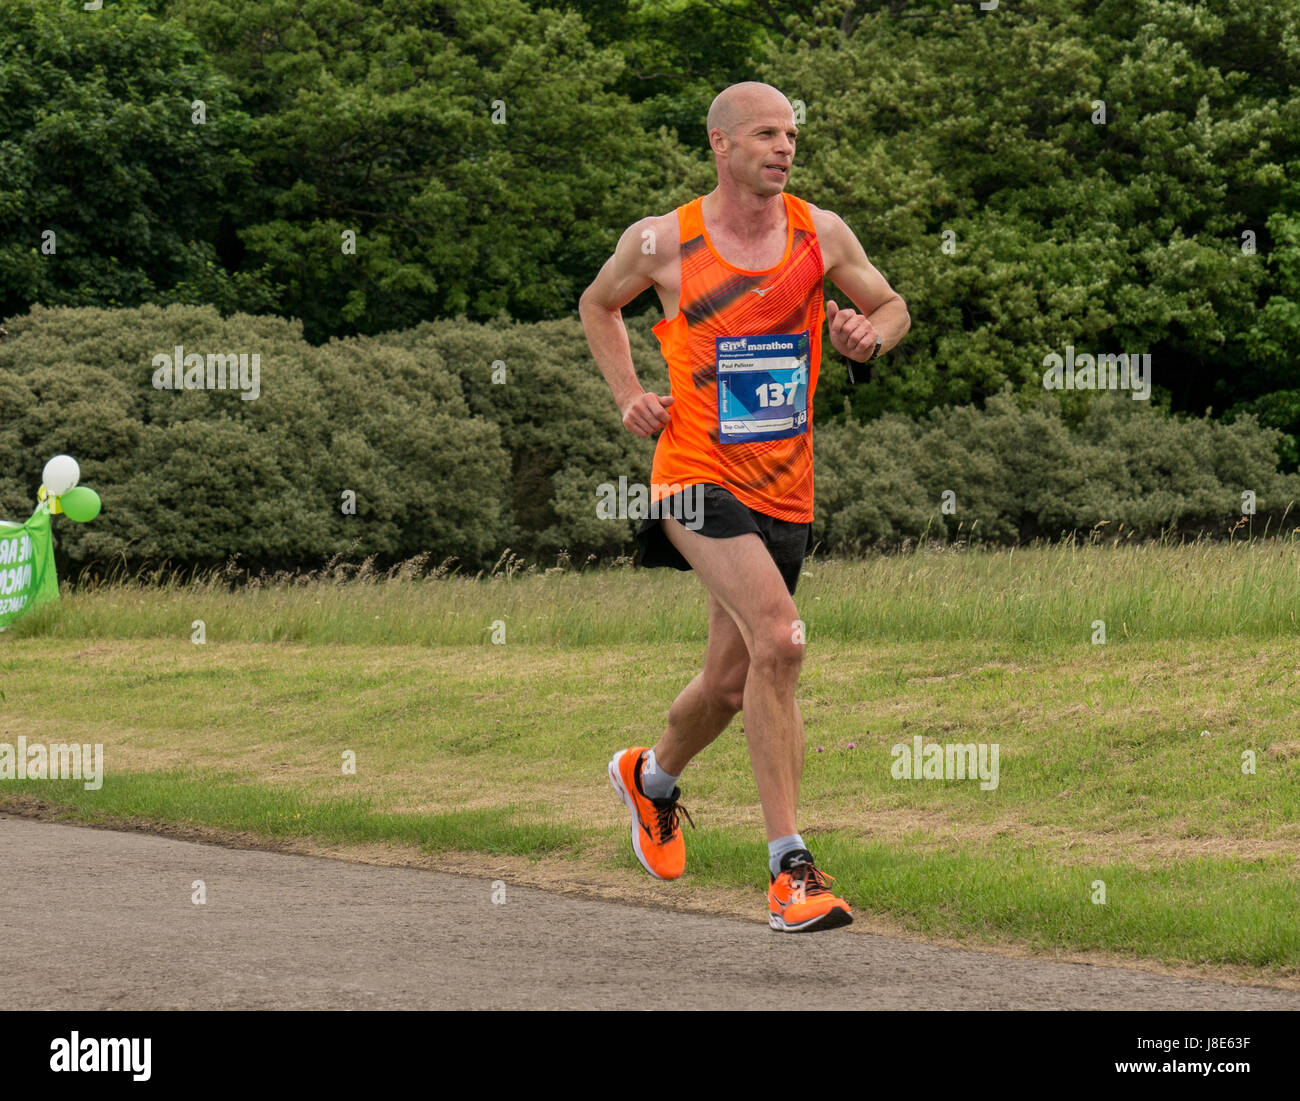 Gosford Estate, East Lothian, Scotland, UK. 28th May, 2017. Male runner, Paul Pallister, in orange vest and shoes at Mile 18 at Edinburgh Marathon Festival 2017. Paul was placed in the top 50 finishers Stock Photo